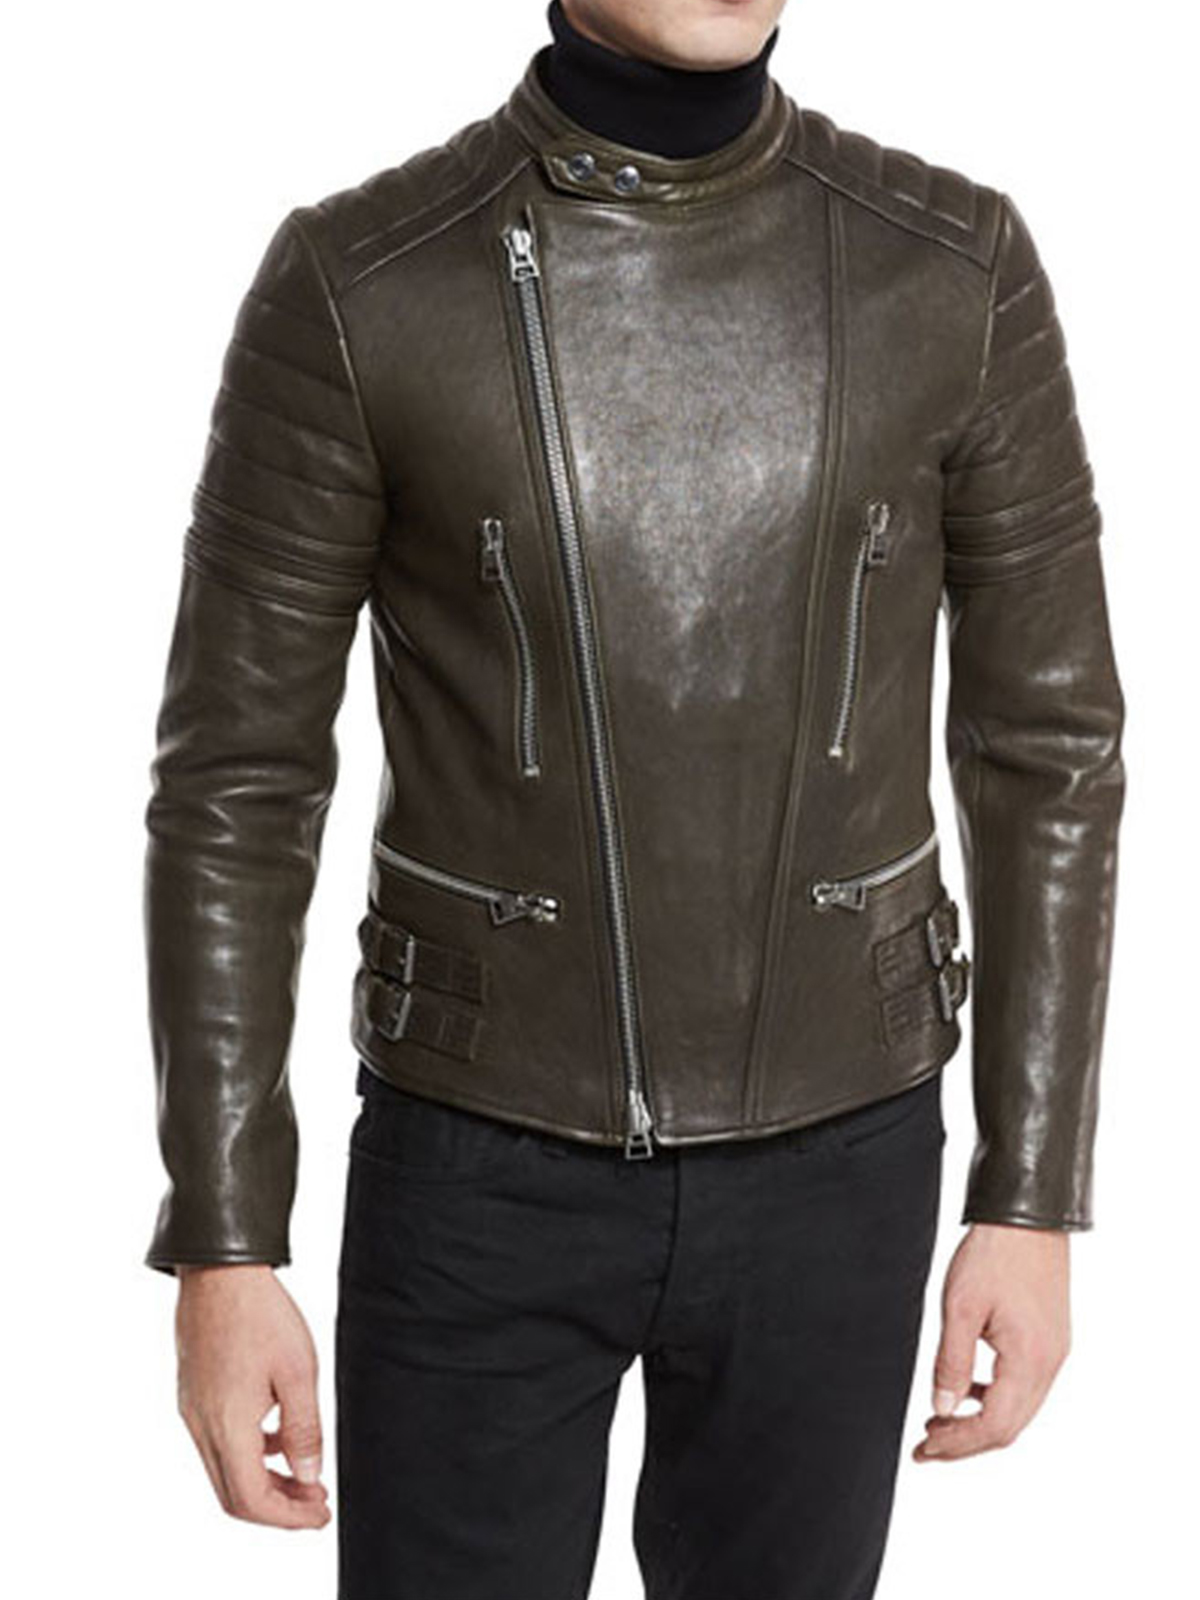 Tom Ford Quilted Leather Biker Jacket